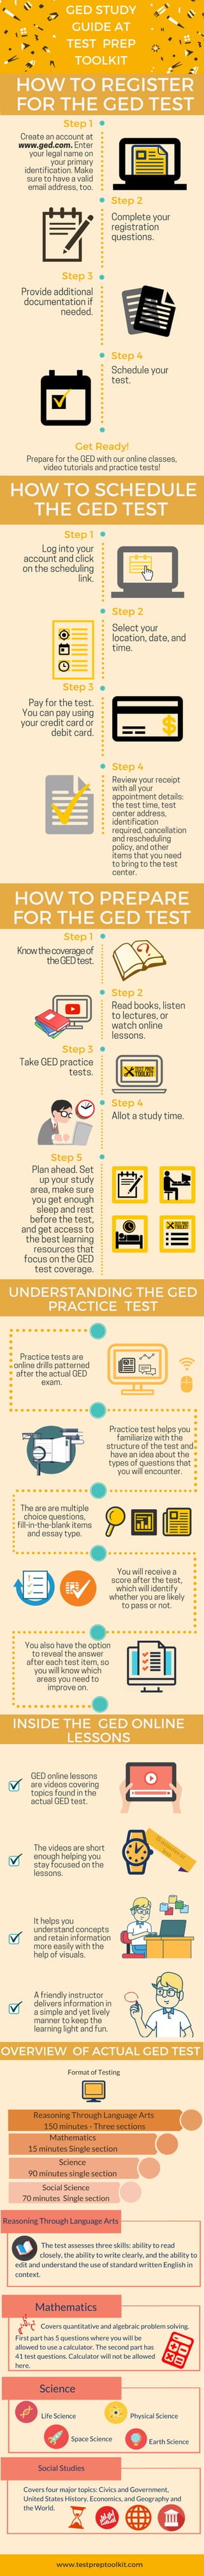 GED Test Guide